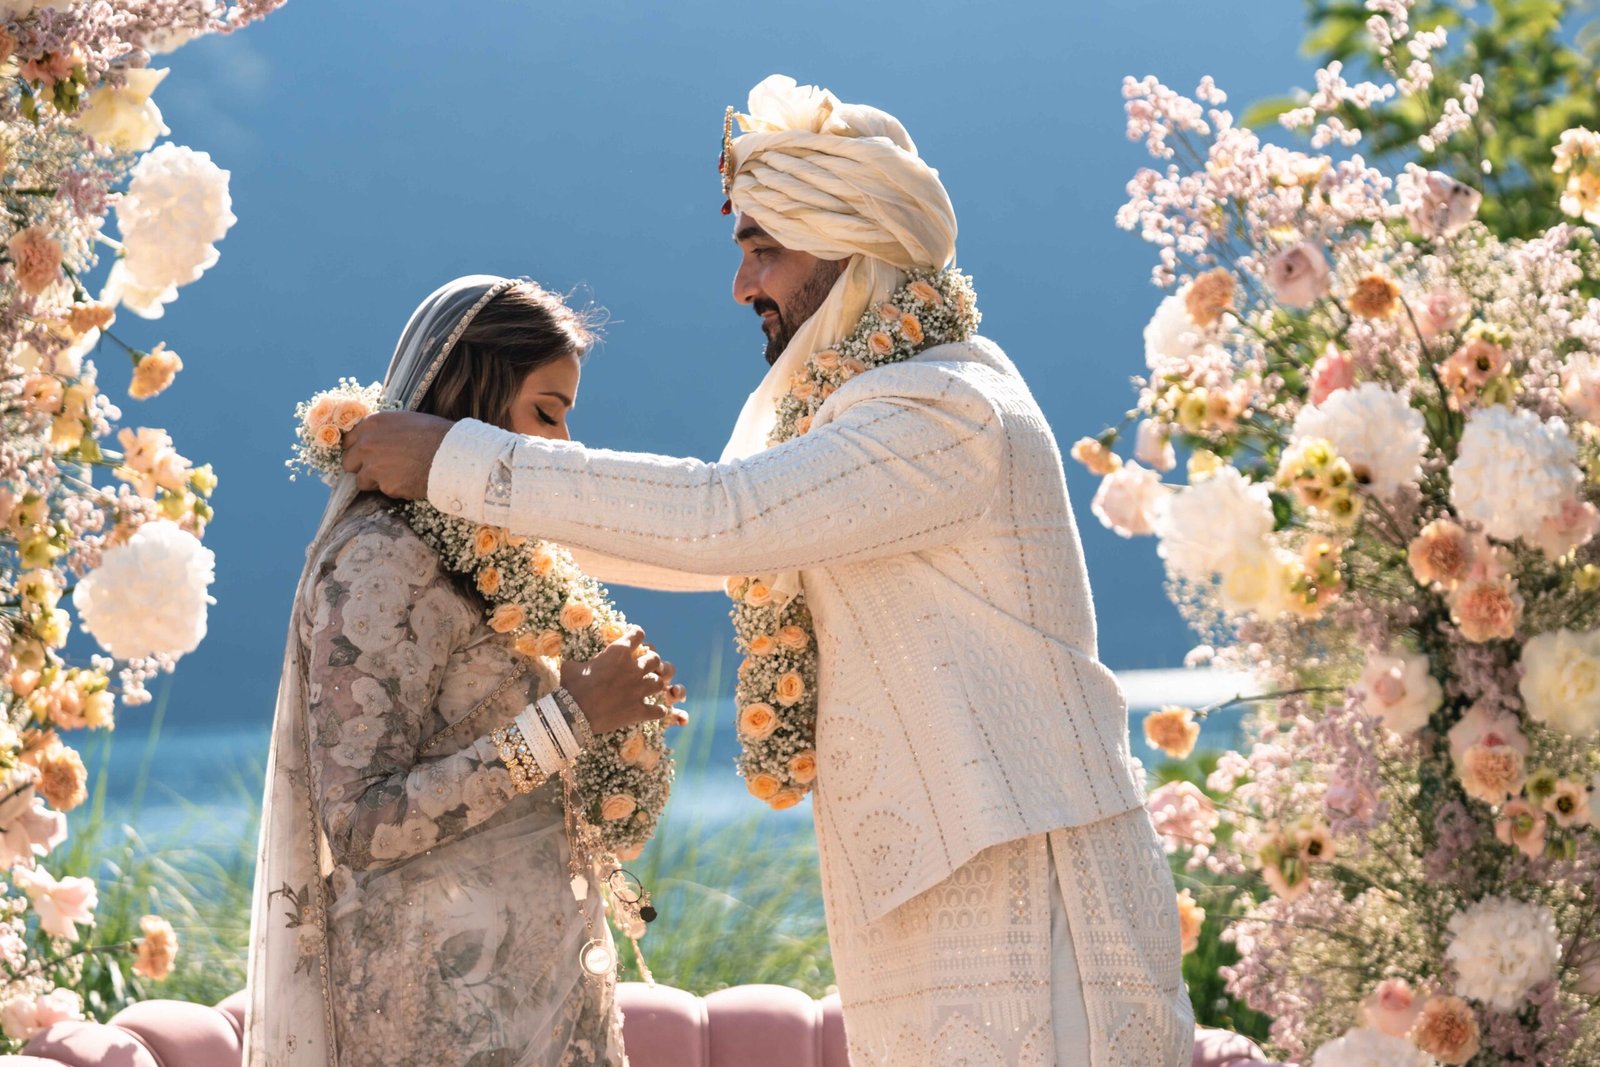 indian wedding - SugarEvents Luxury Wedding and Event Planner